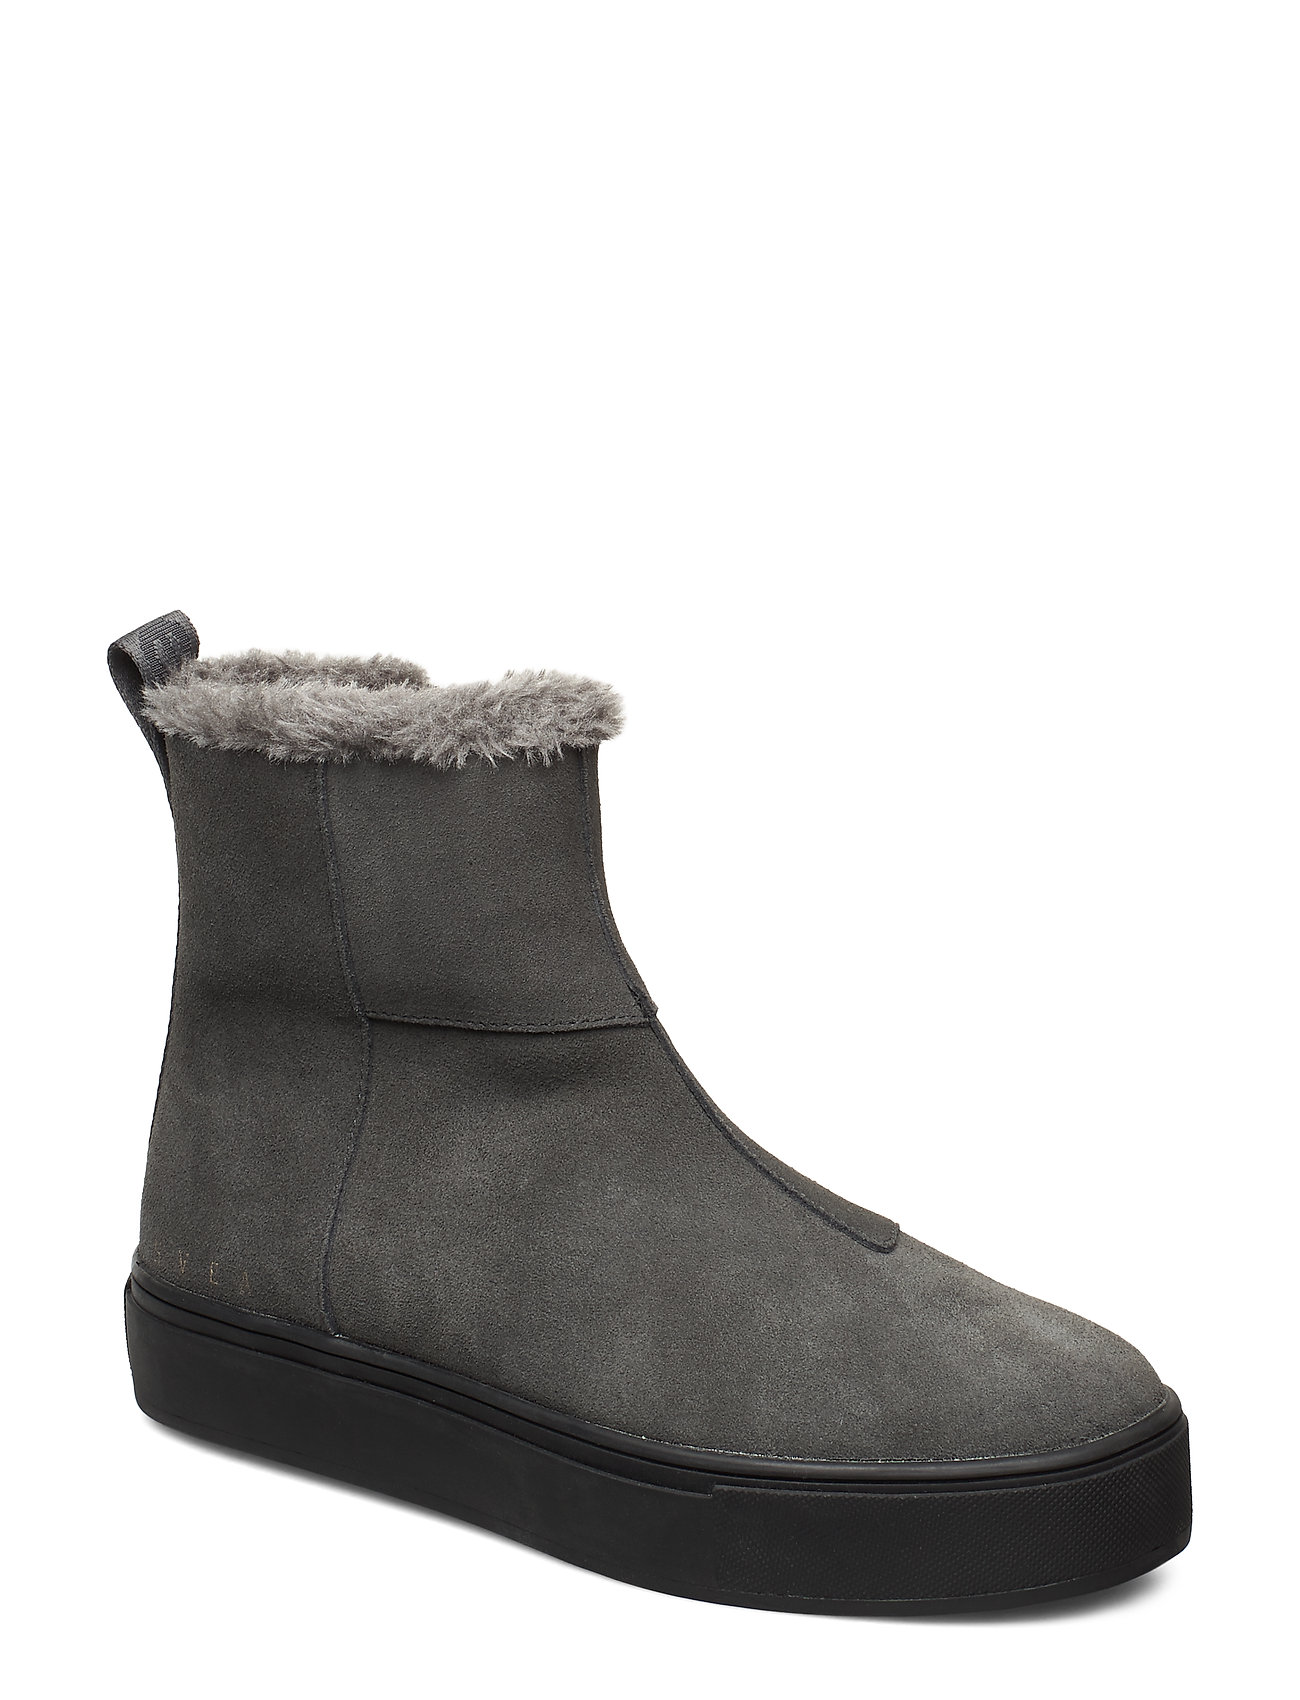 Suede / Pile Boots Shoes Boots Ankle Boots Ankle Boot - Flat Harmaa Svea